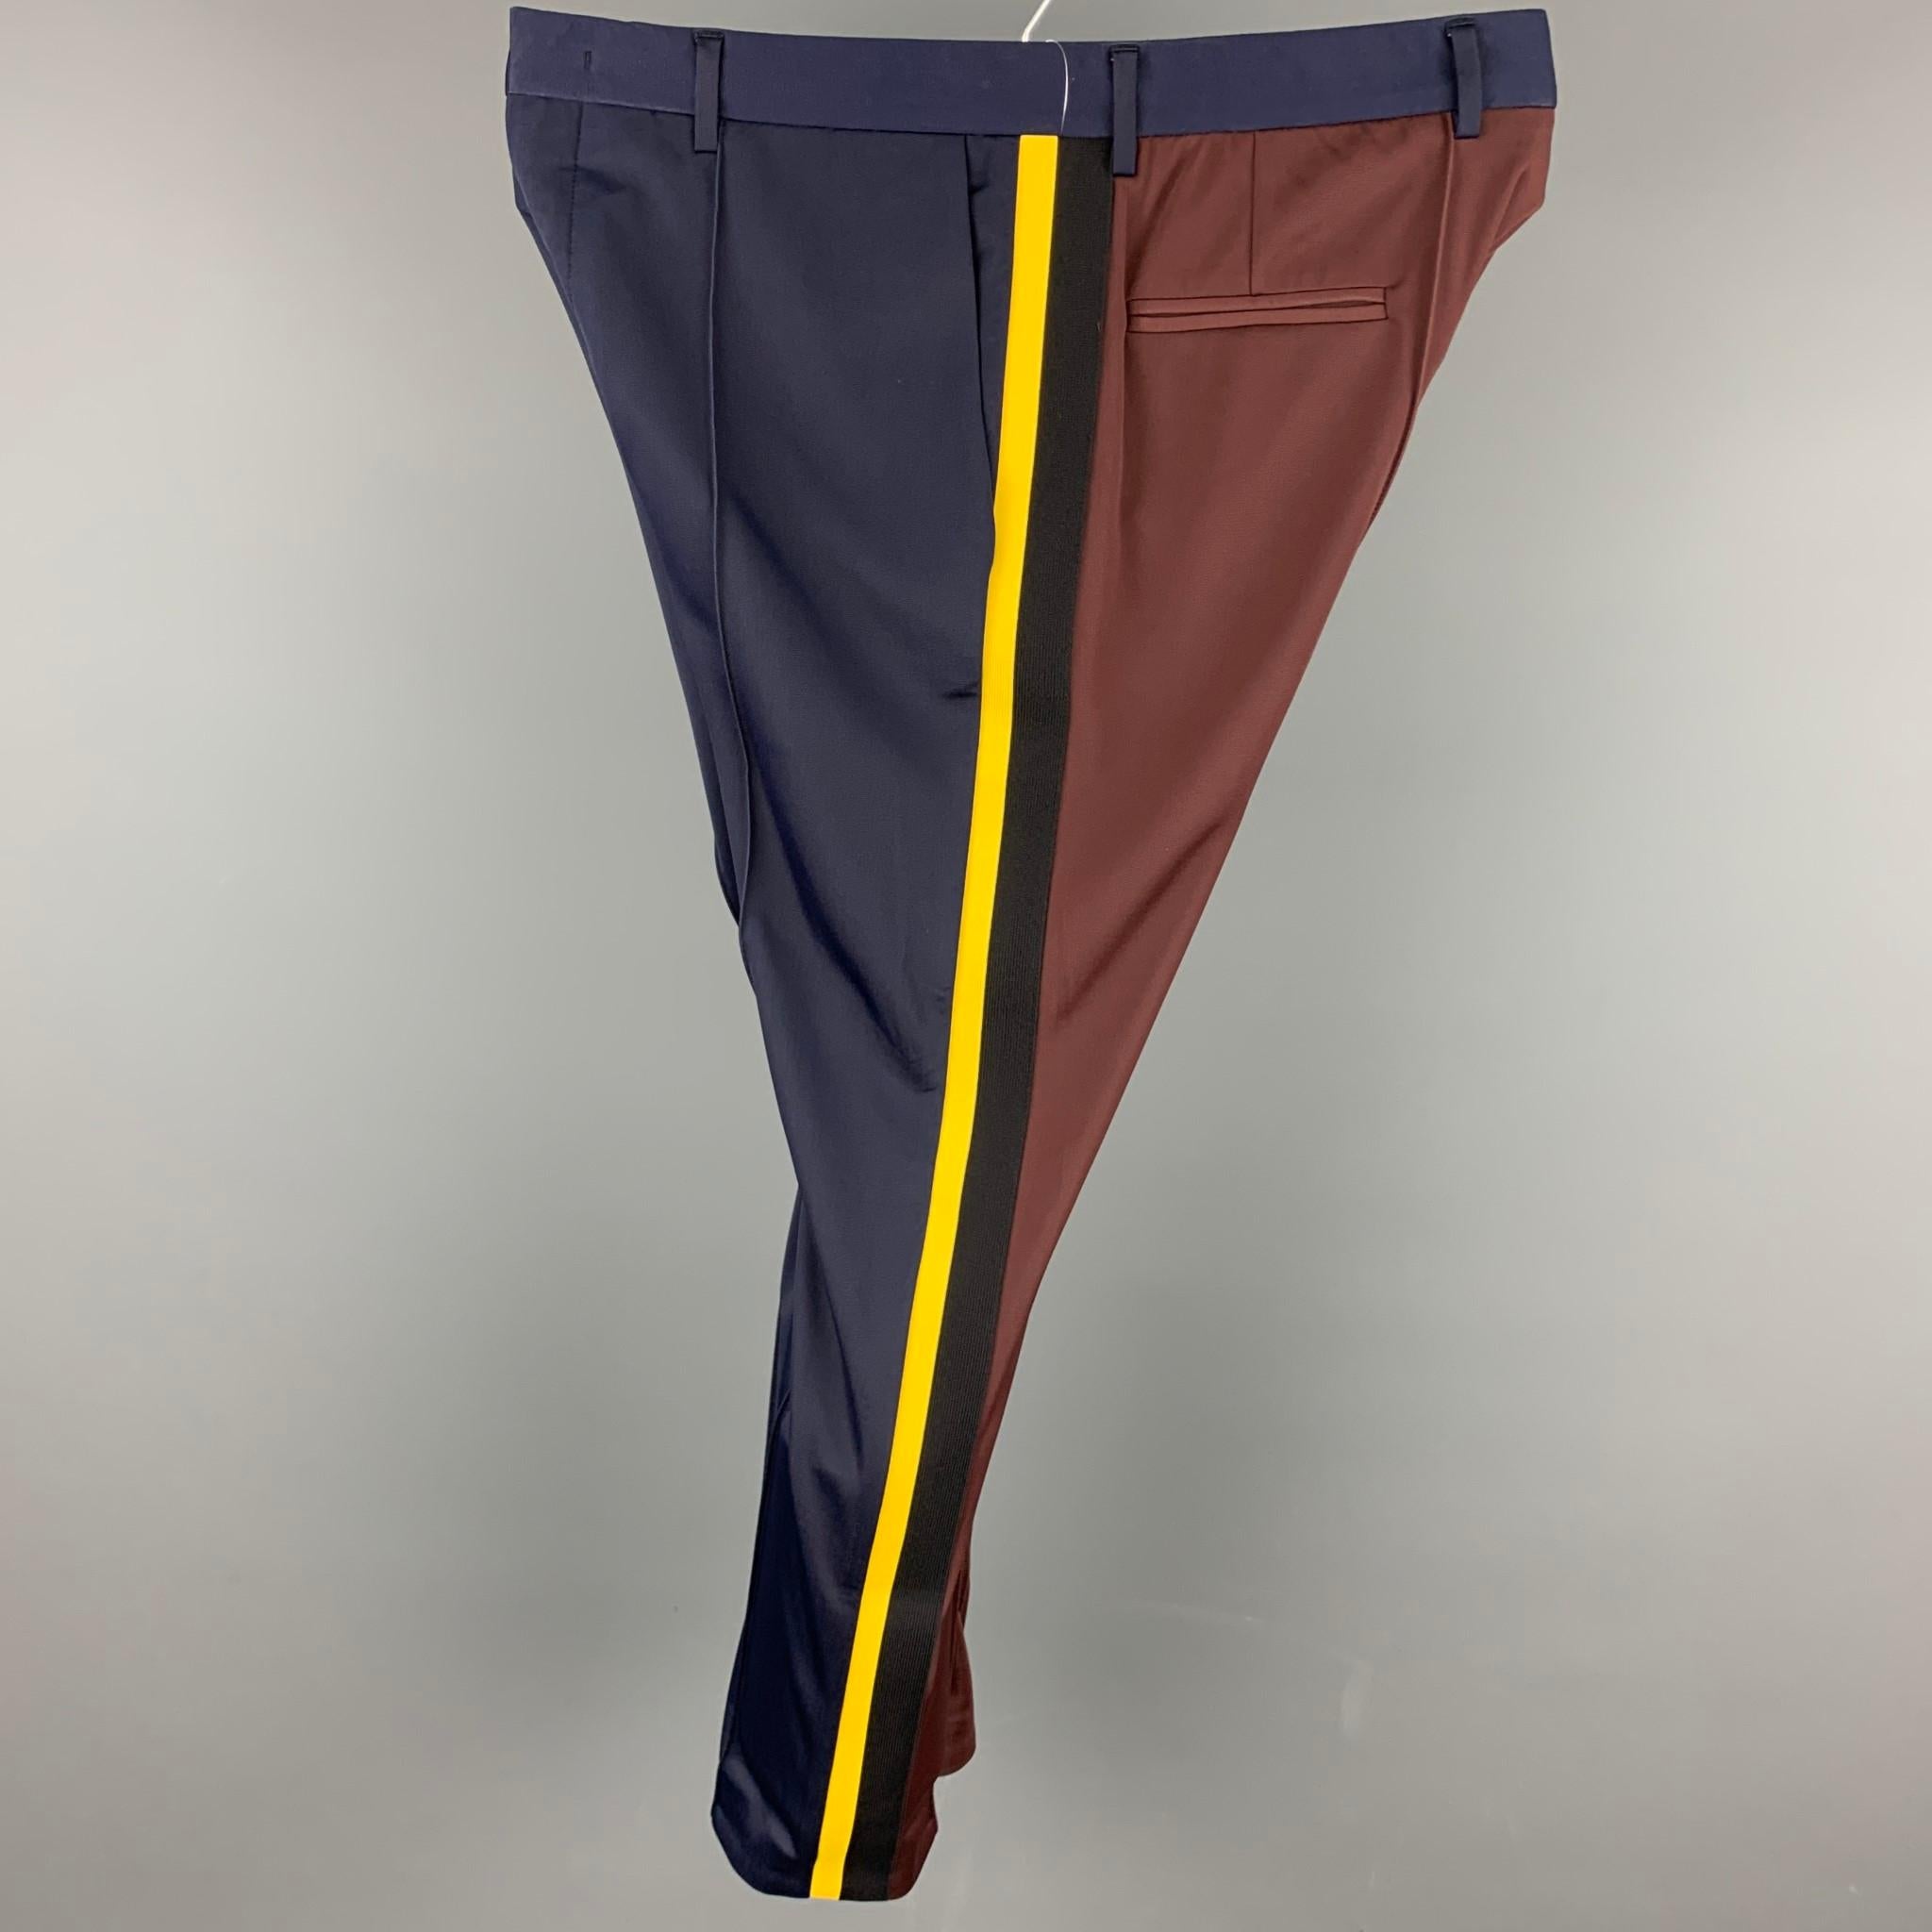 MSGM casual pants comes in navy & brown color block polyester / polyamide with a yellow stripe design featuring a slim fit, front tab, and a zip fly closure. Made in Italy.

Very Good Pre-Owned Condition.
Marked: IT 52

Measurements:

Waist: 36